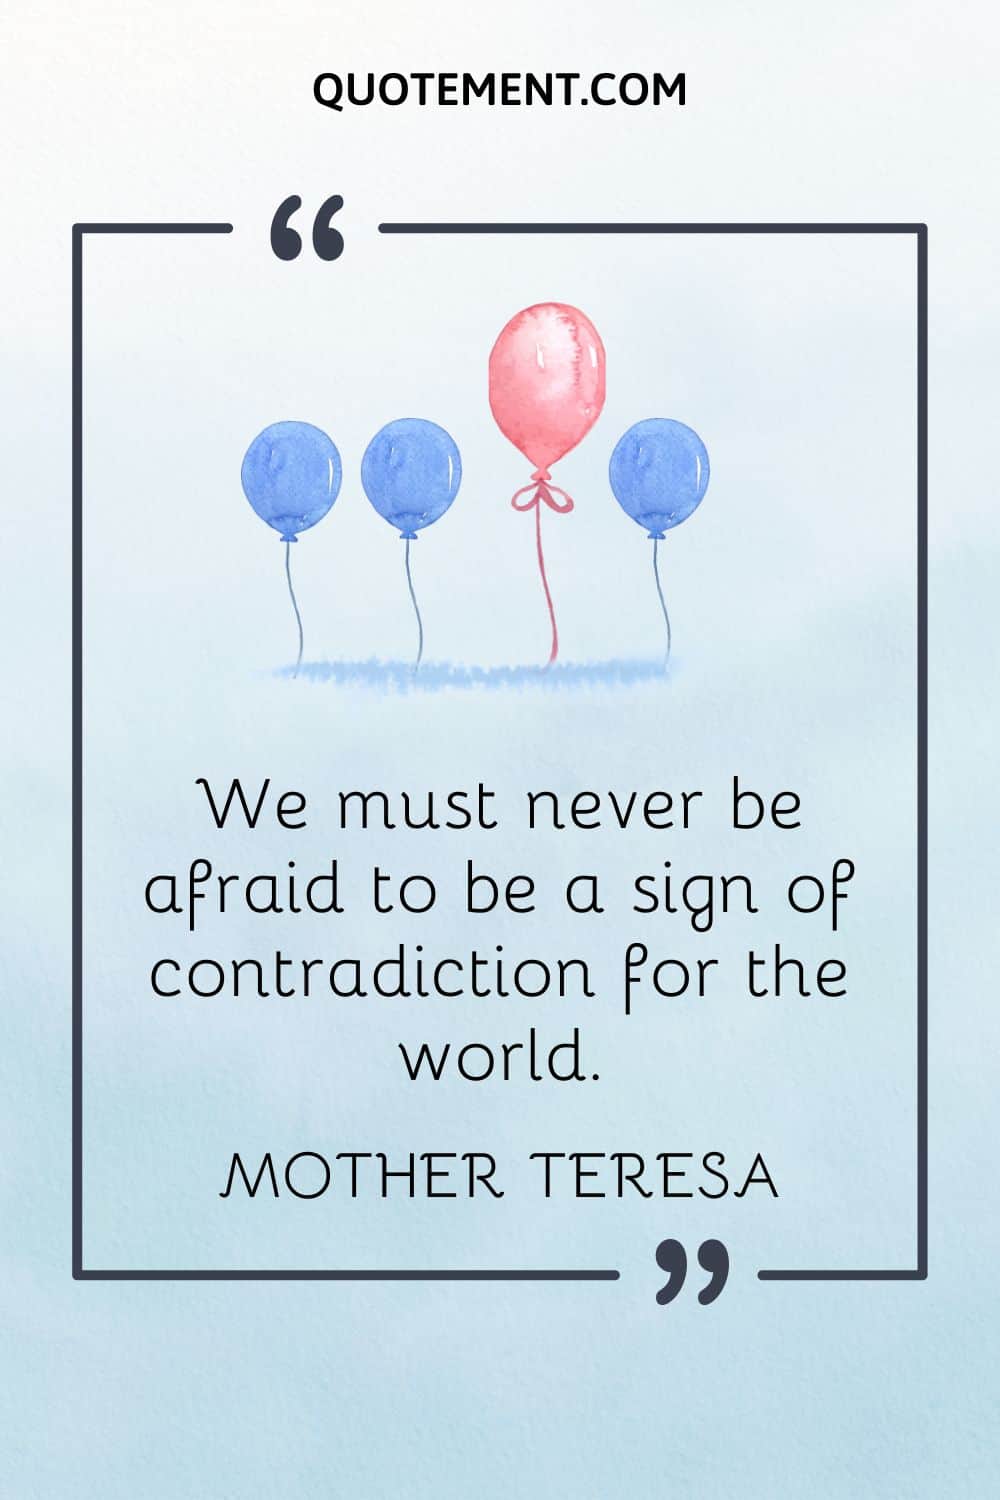 We must never be afraid to be a sign of contradiction for the world.